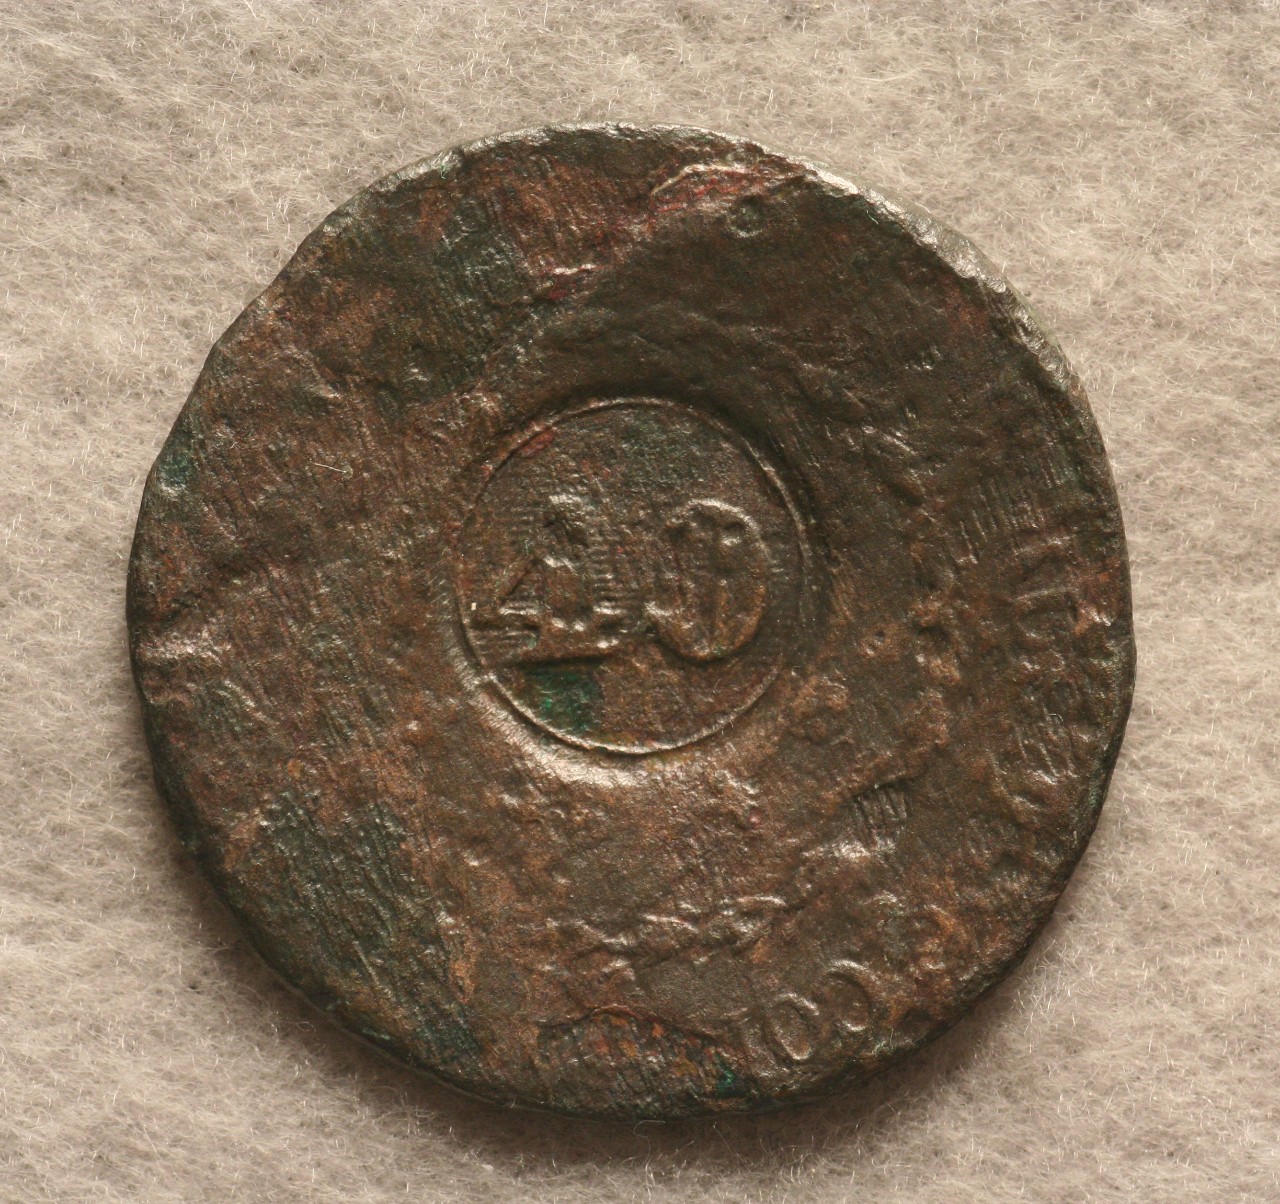 <p>A round bronze Brazilian 40-Reis coin recovered from the CSS Alabama. On the reverse side is a faded crown on top of a faded shield that is surrounded by garland. This coin was produced during the reign of King Pedro I of Brazil.</p>